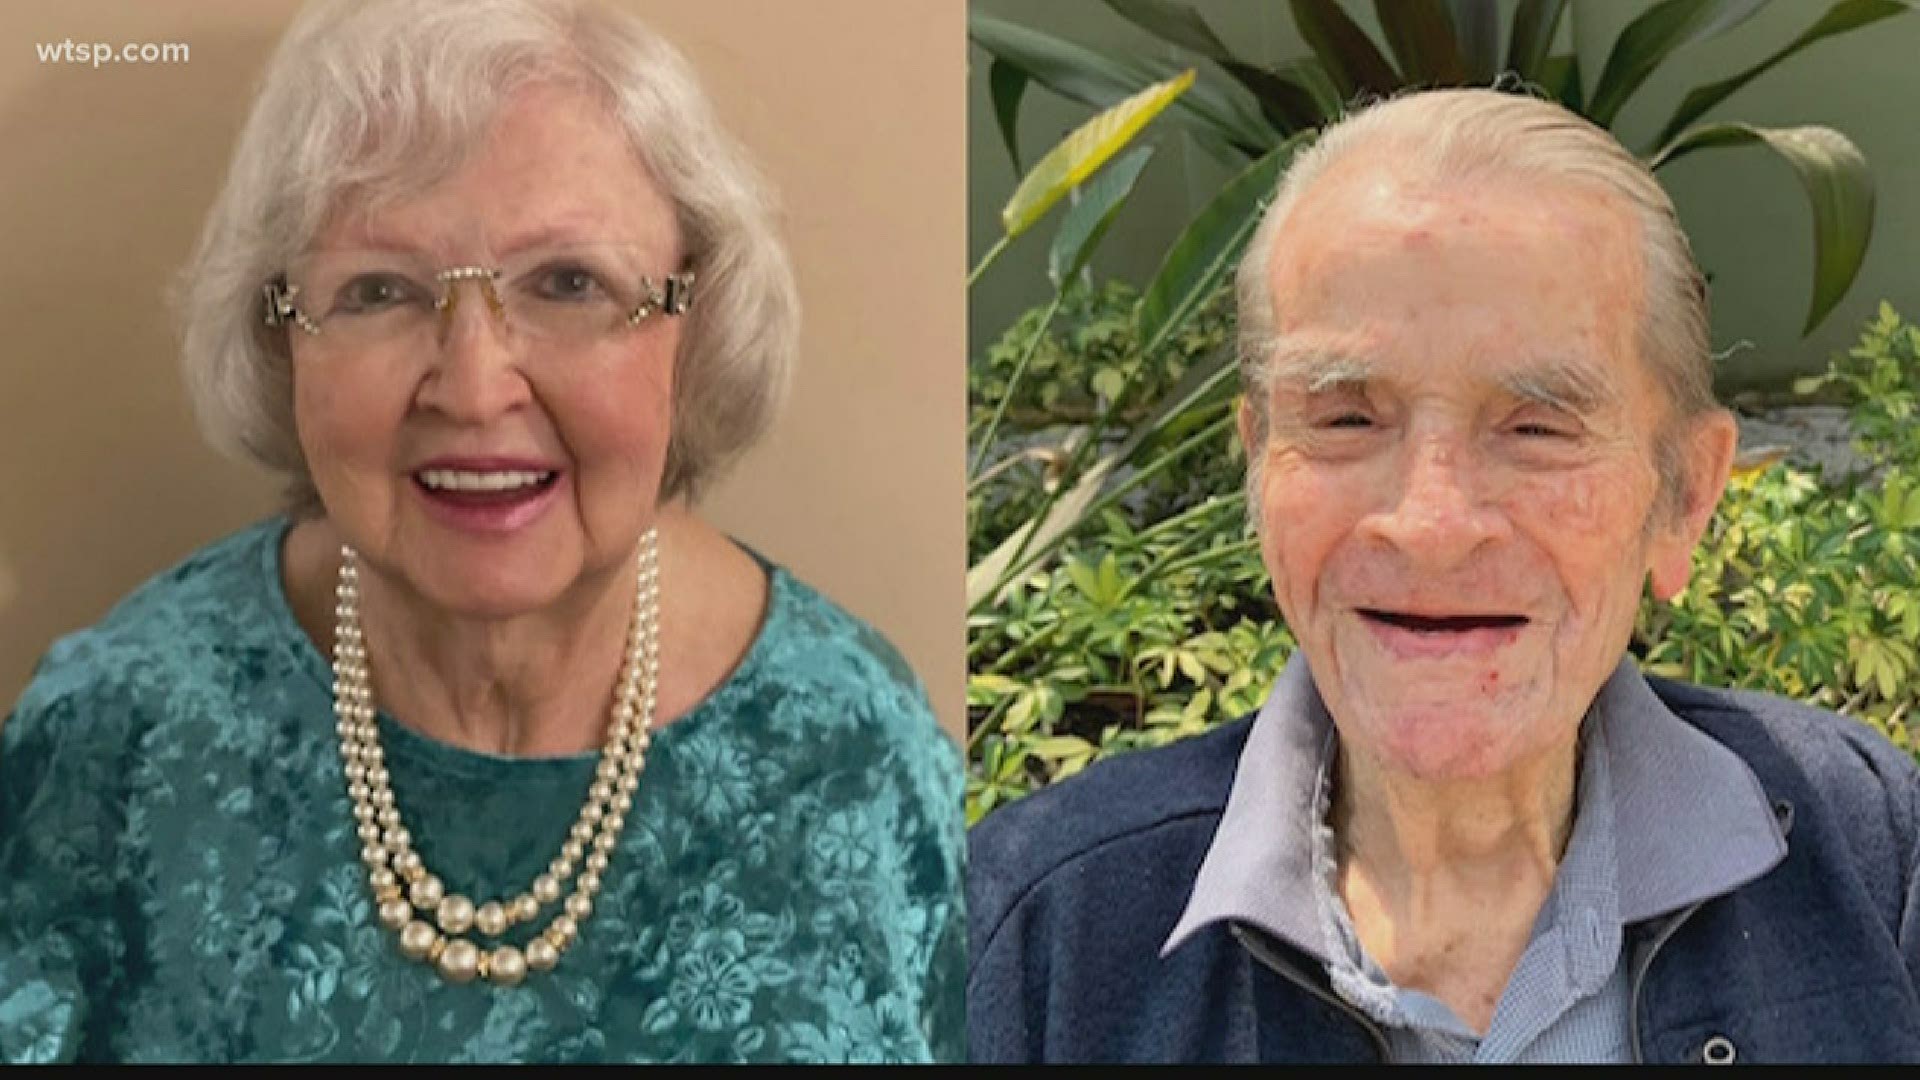 Don and Joan Carroll were married on April 16, 1950. They are celebrating 70 years together through photos and videos while apart.